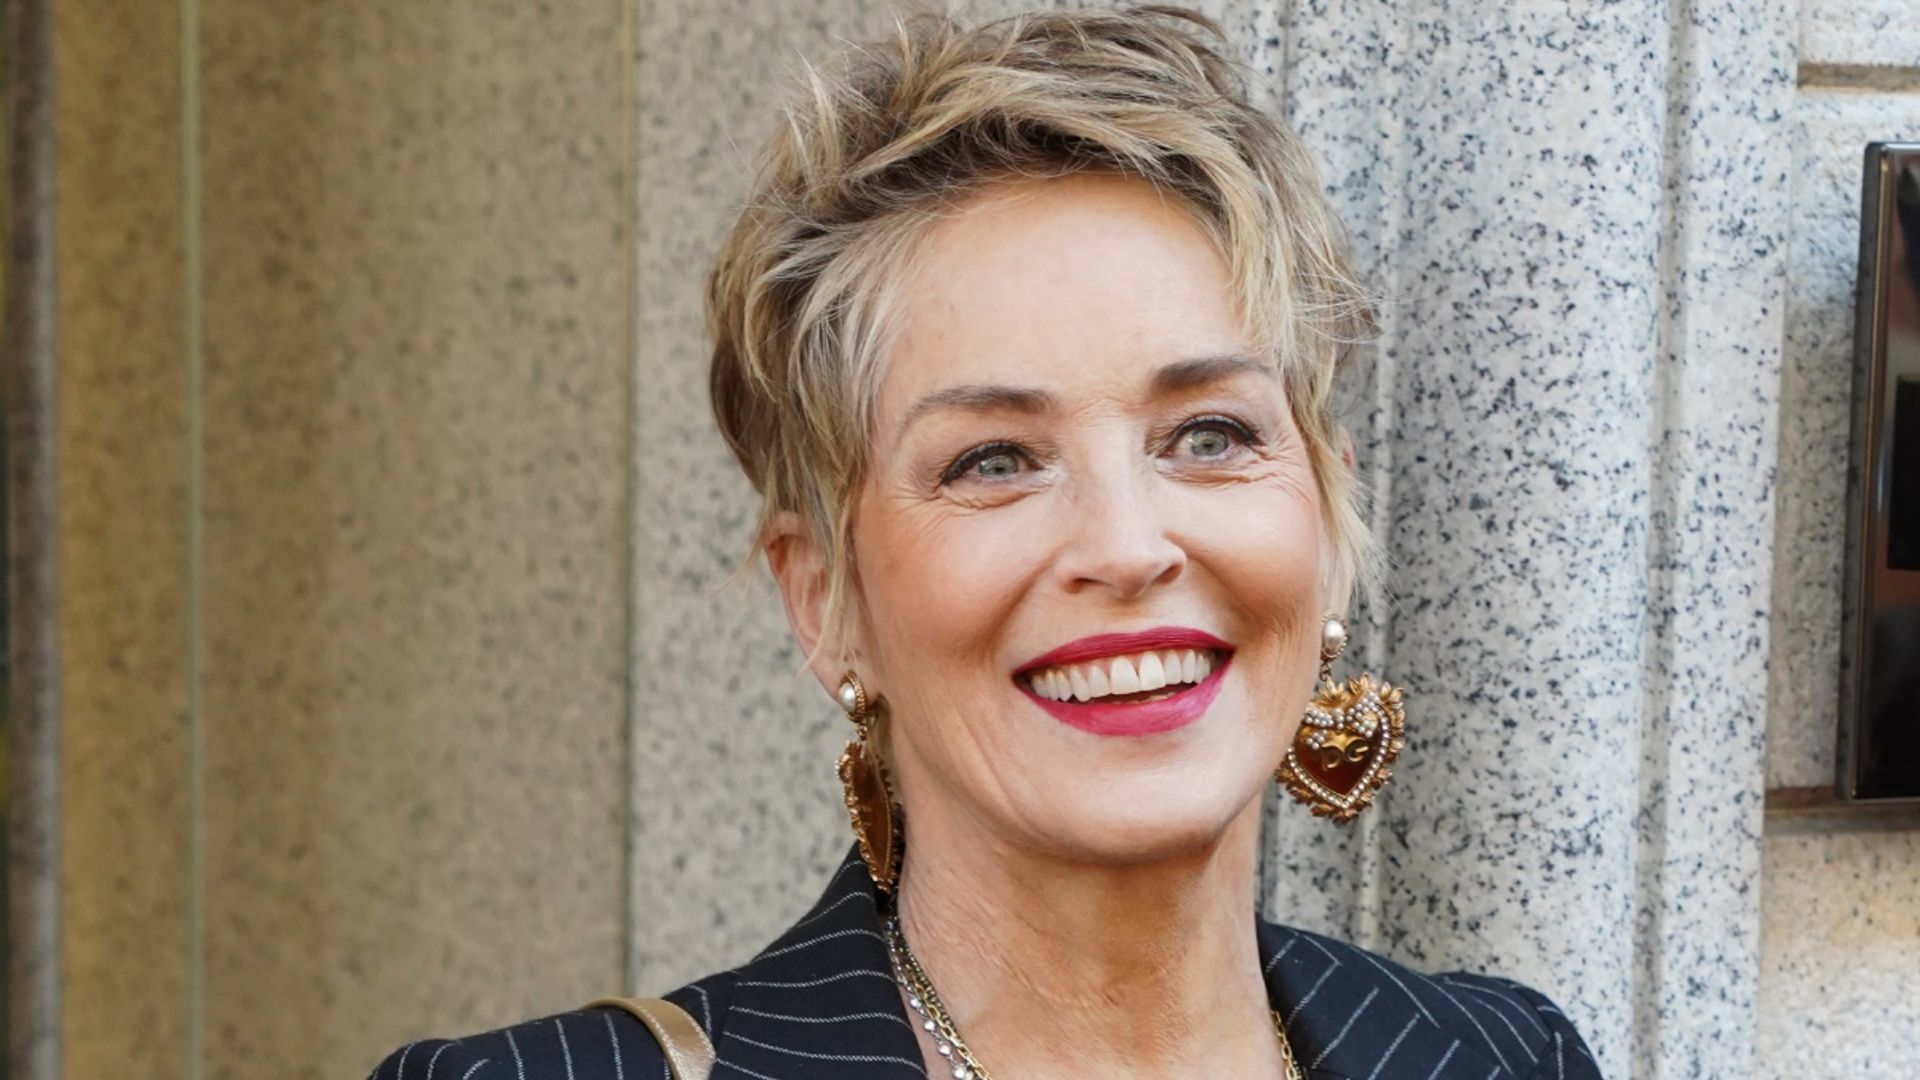 Sharon Stone marks major career milestone with jaw-dropping throwback